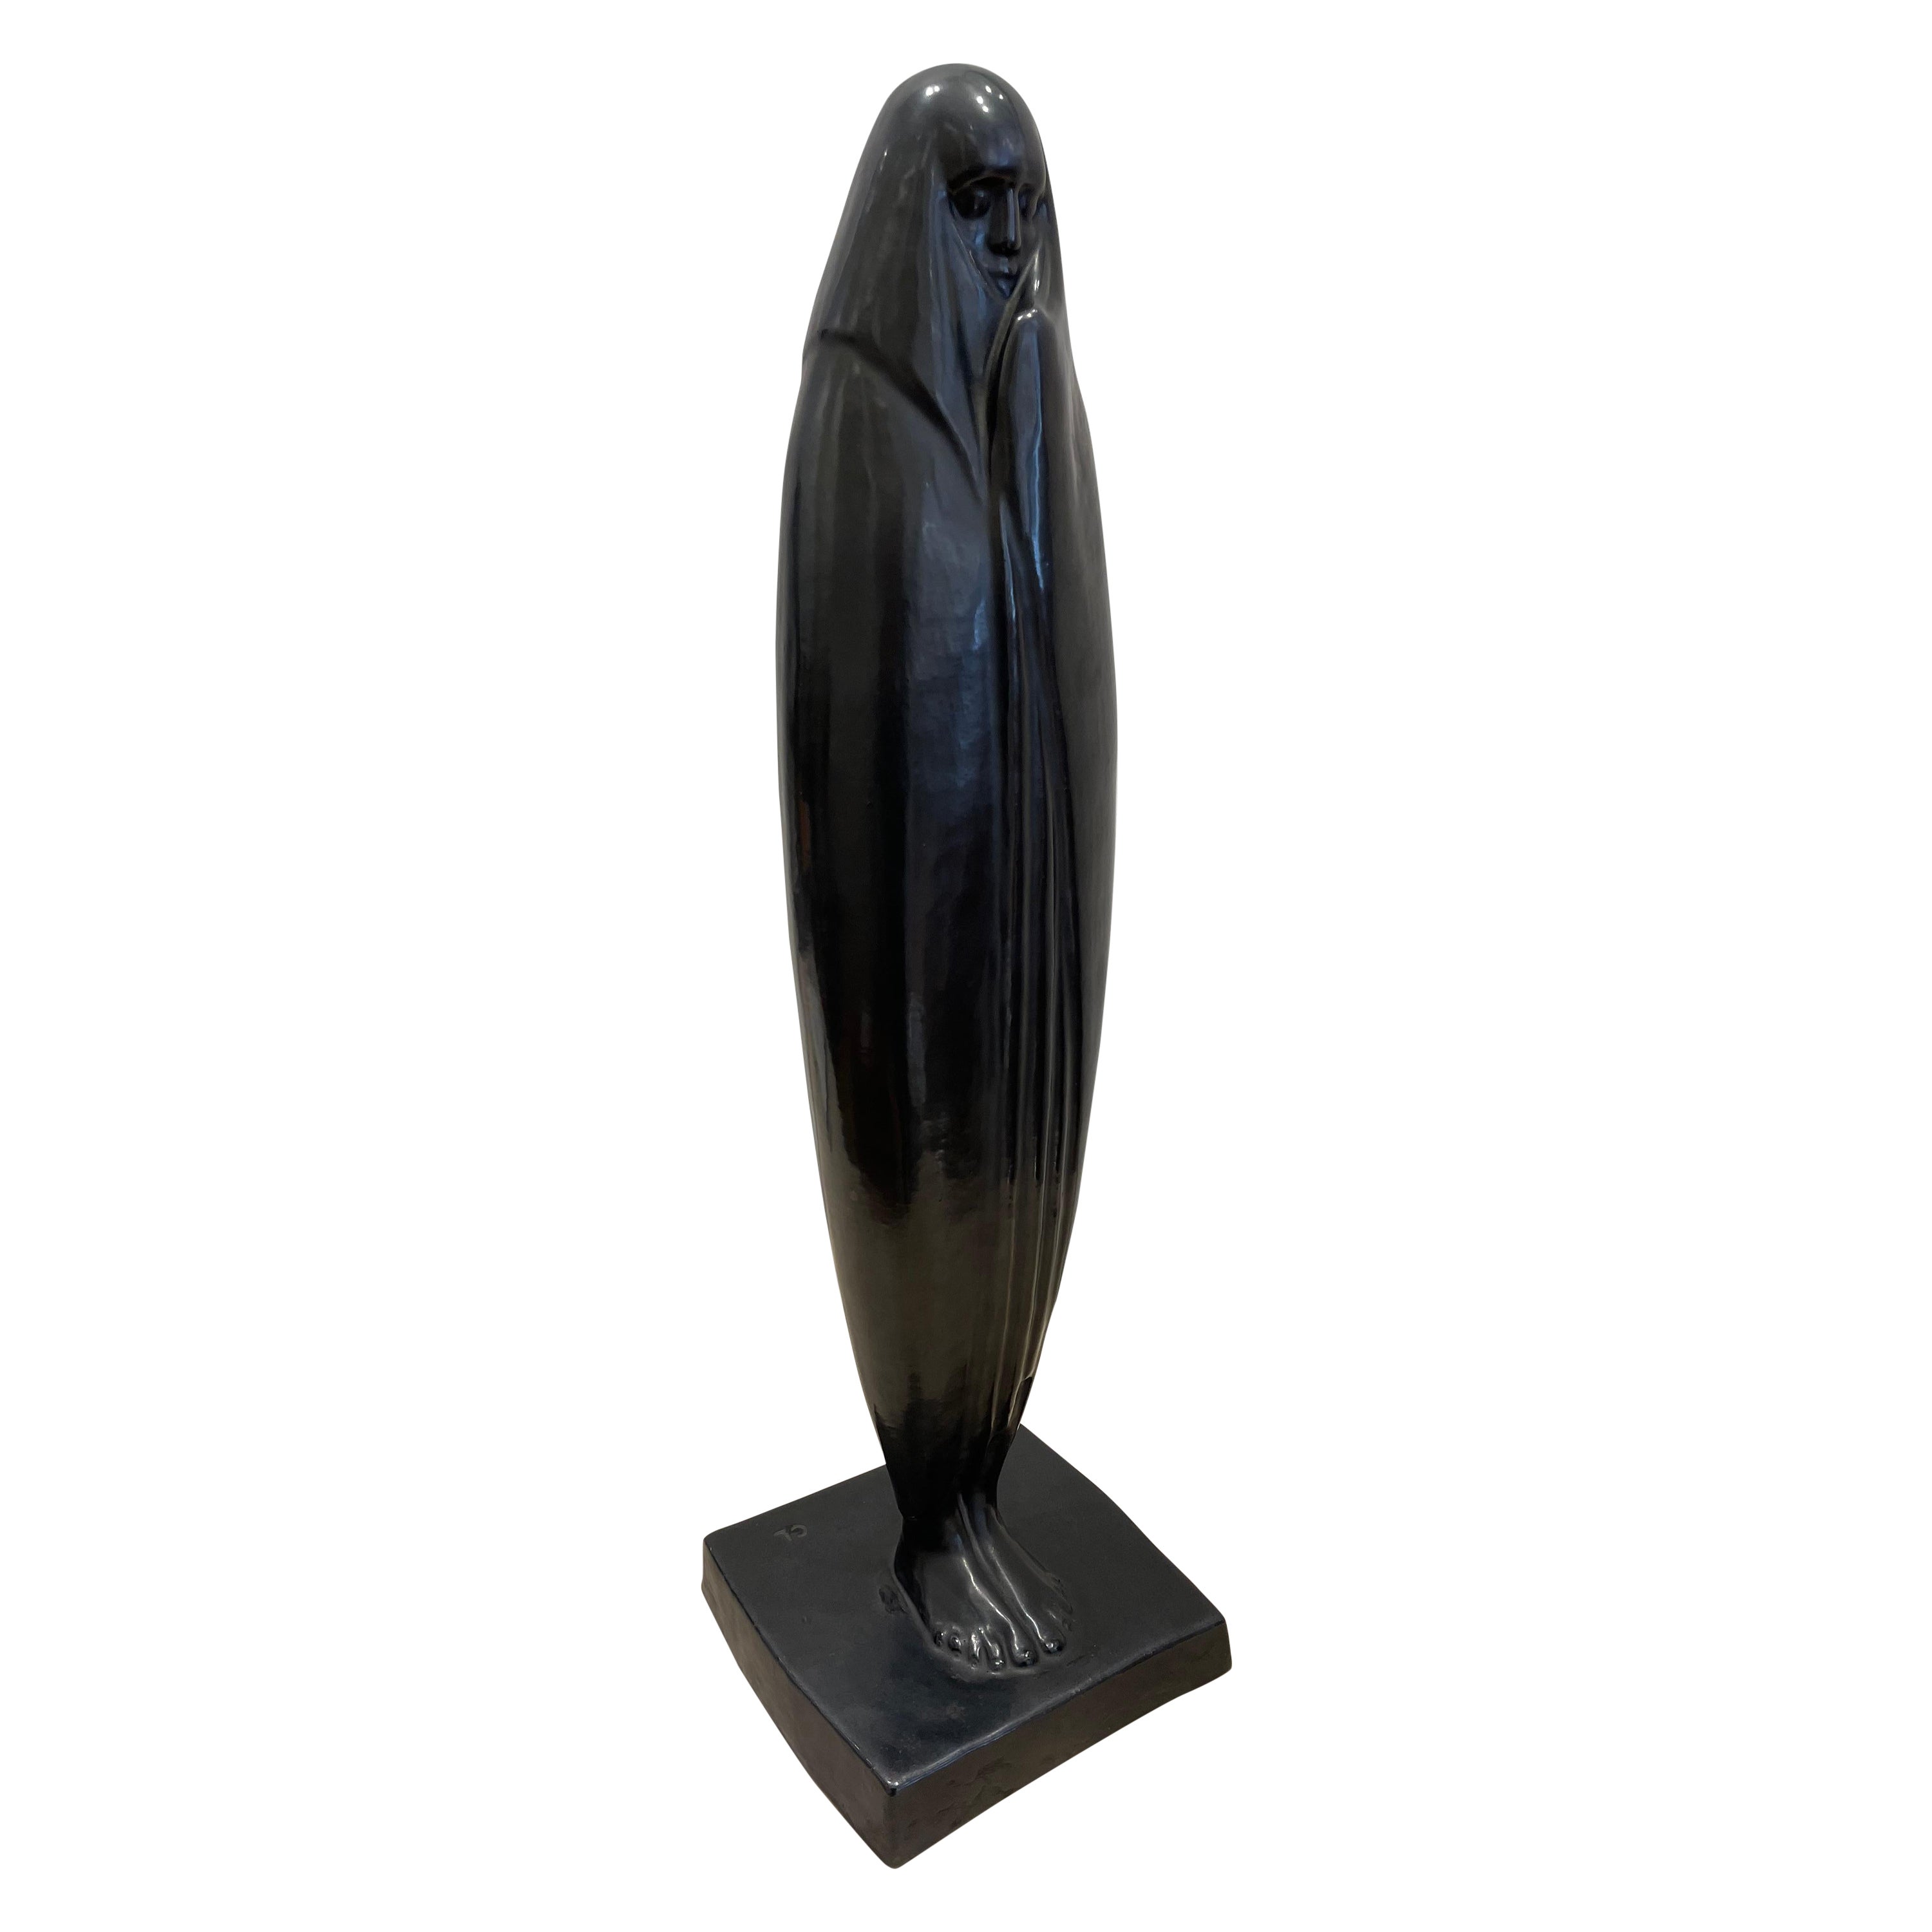 Superb Ceramic "Veiled Lady from Marrakech" by Céline Lepage, Art Deco, France